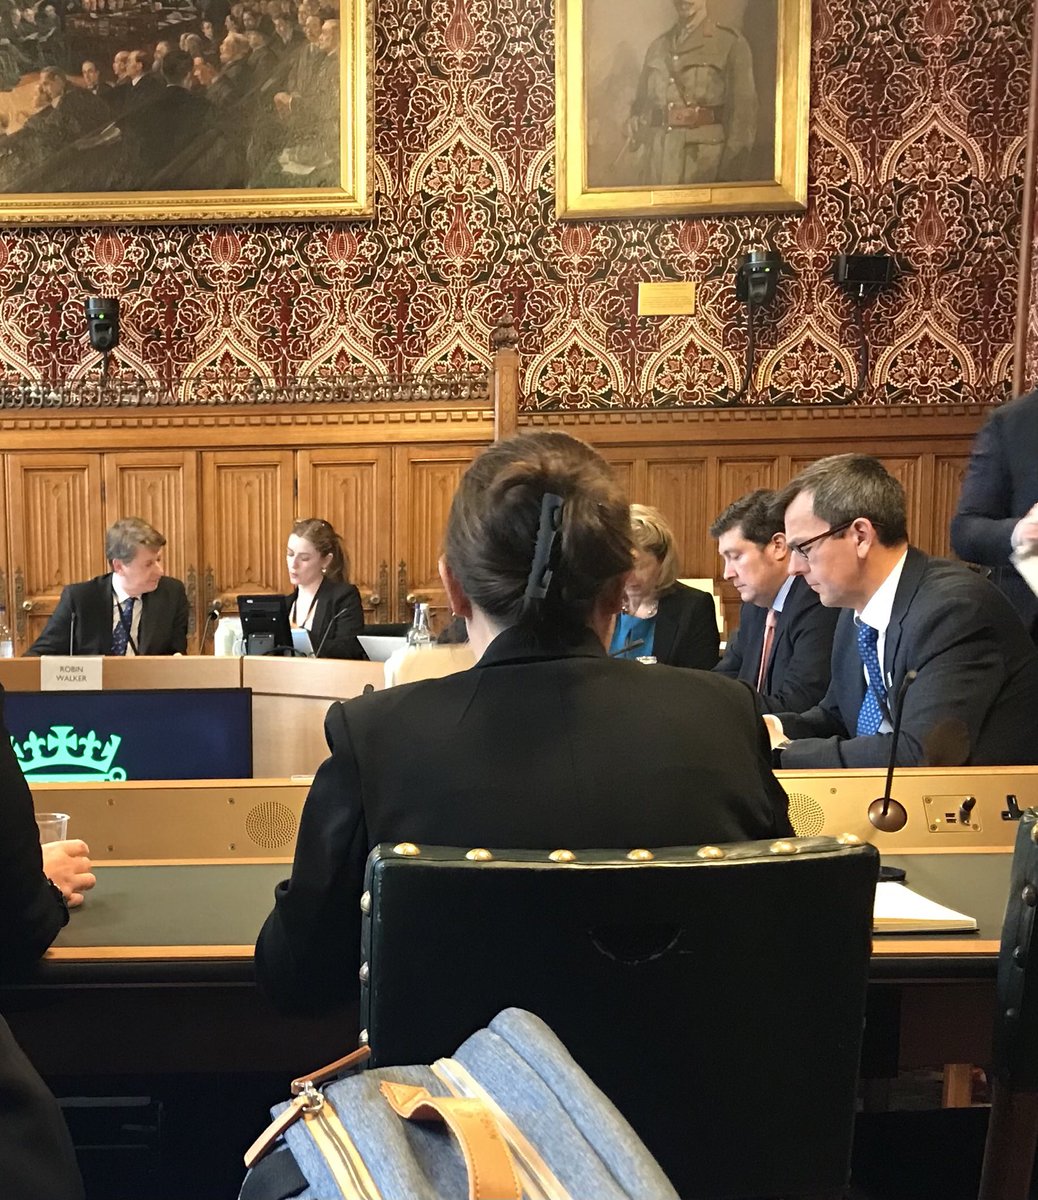 “We’d like a wider approach across all care experienced children including those who are adopted.” Our CEO Emily Frith to select committee inquiry on children’s social care today.